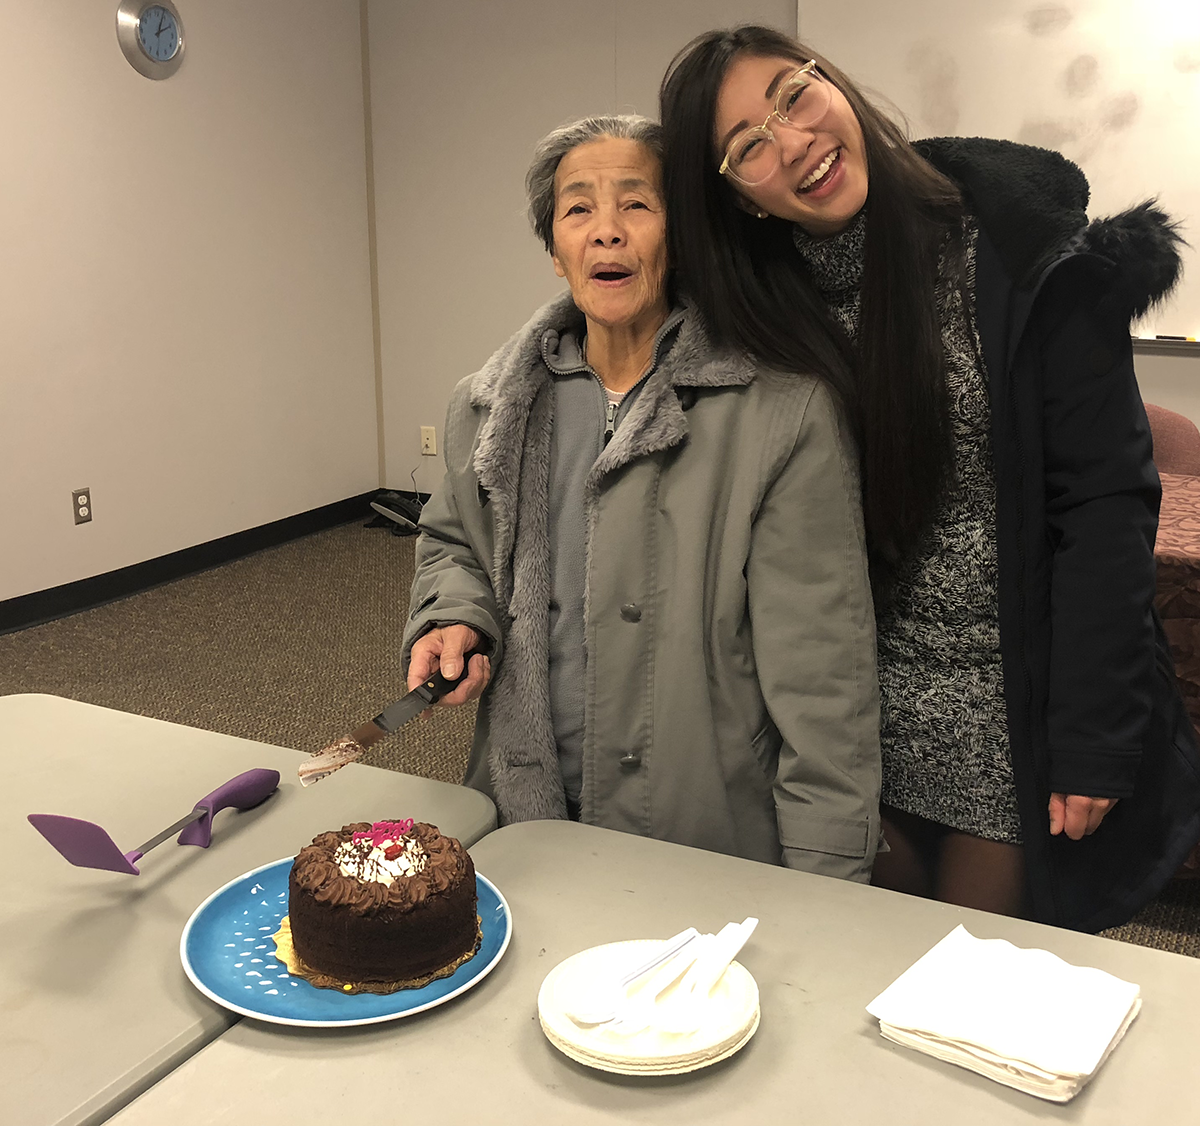 GivingTuesday Stories: Age Doesn't Matter - Lourdes & Chelsea